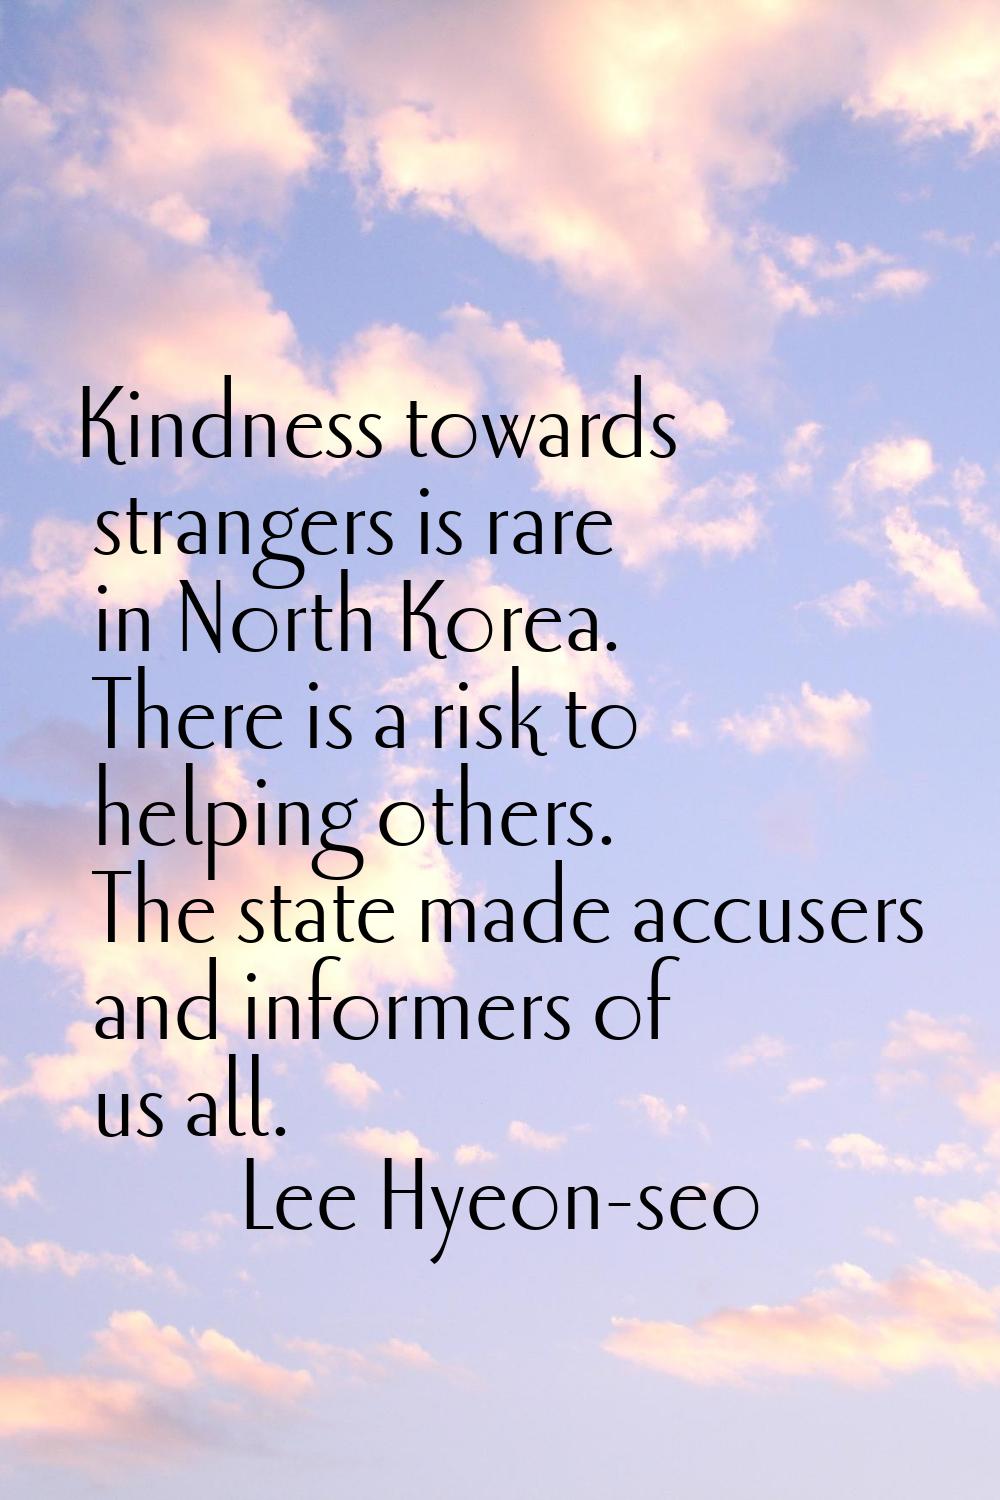 Kindness towards strangers is rare in North Korea. There is a risk to helping others. The state mad